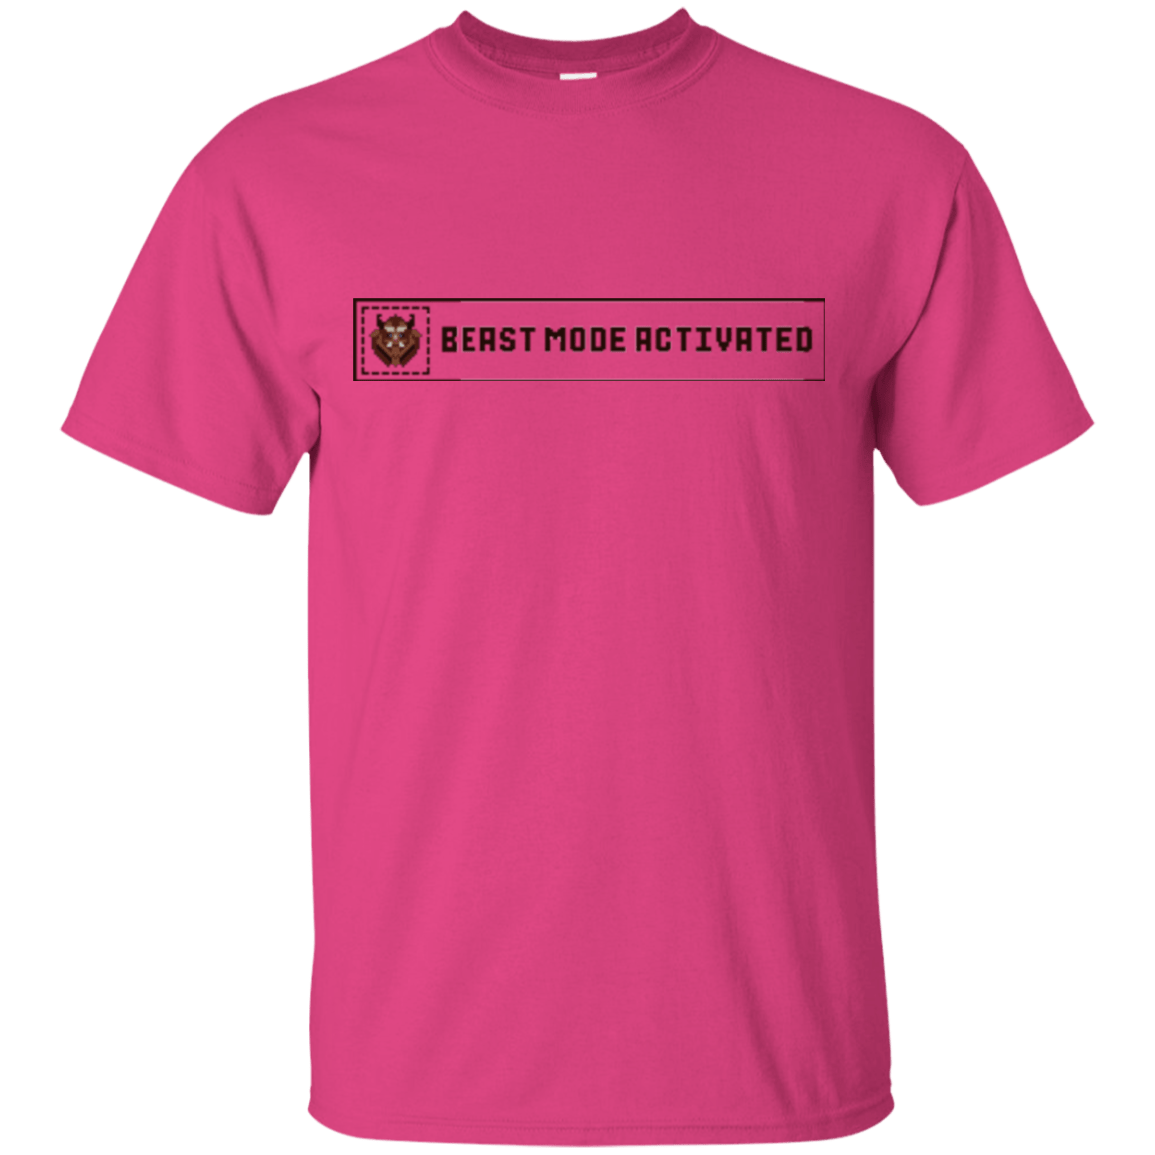 T-Shirts Heliconia / Small Beast Mode Activated T-Shirt